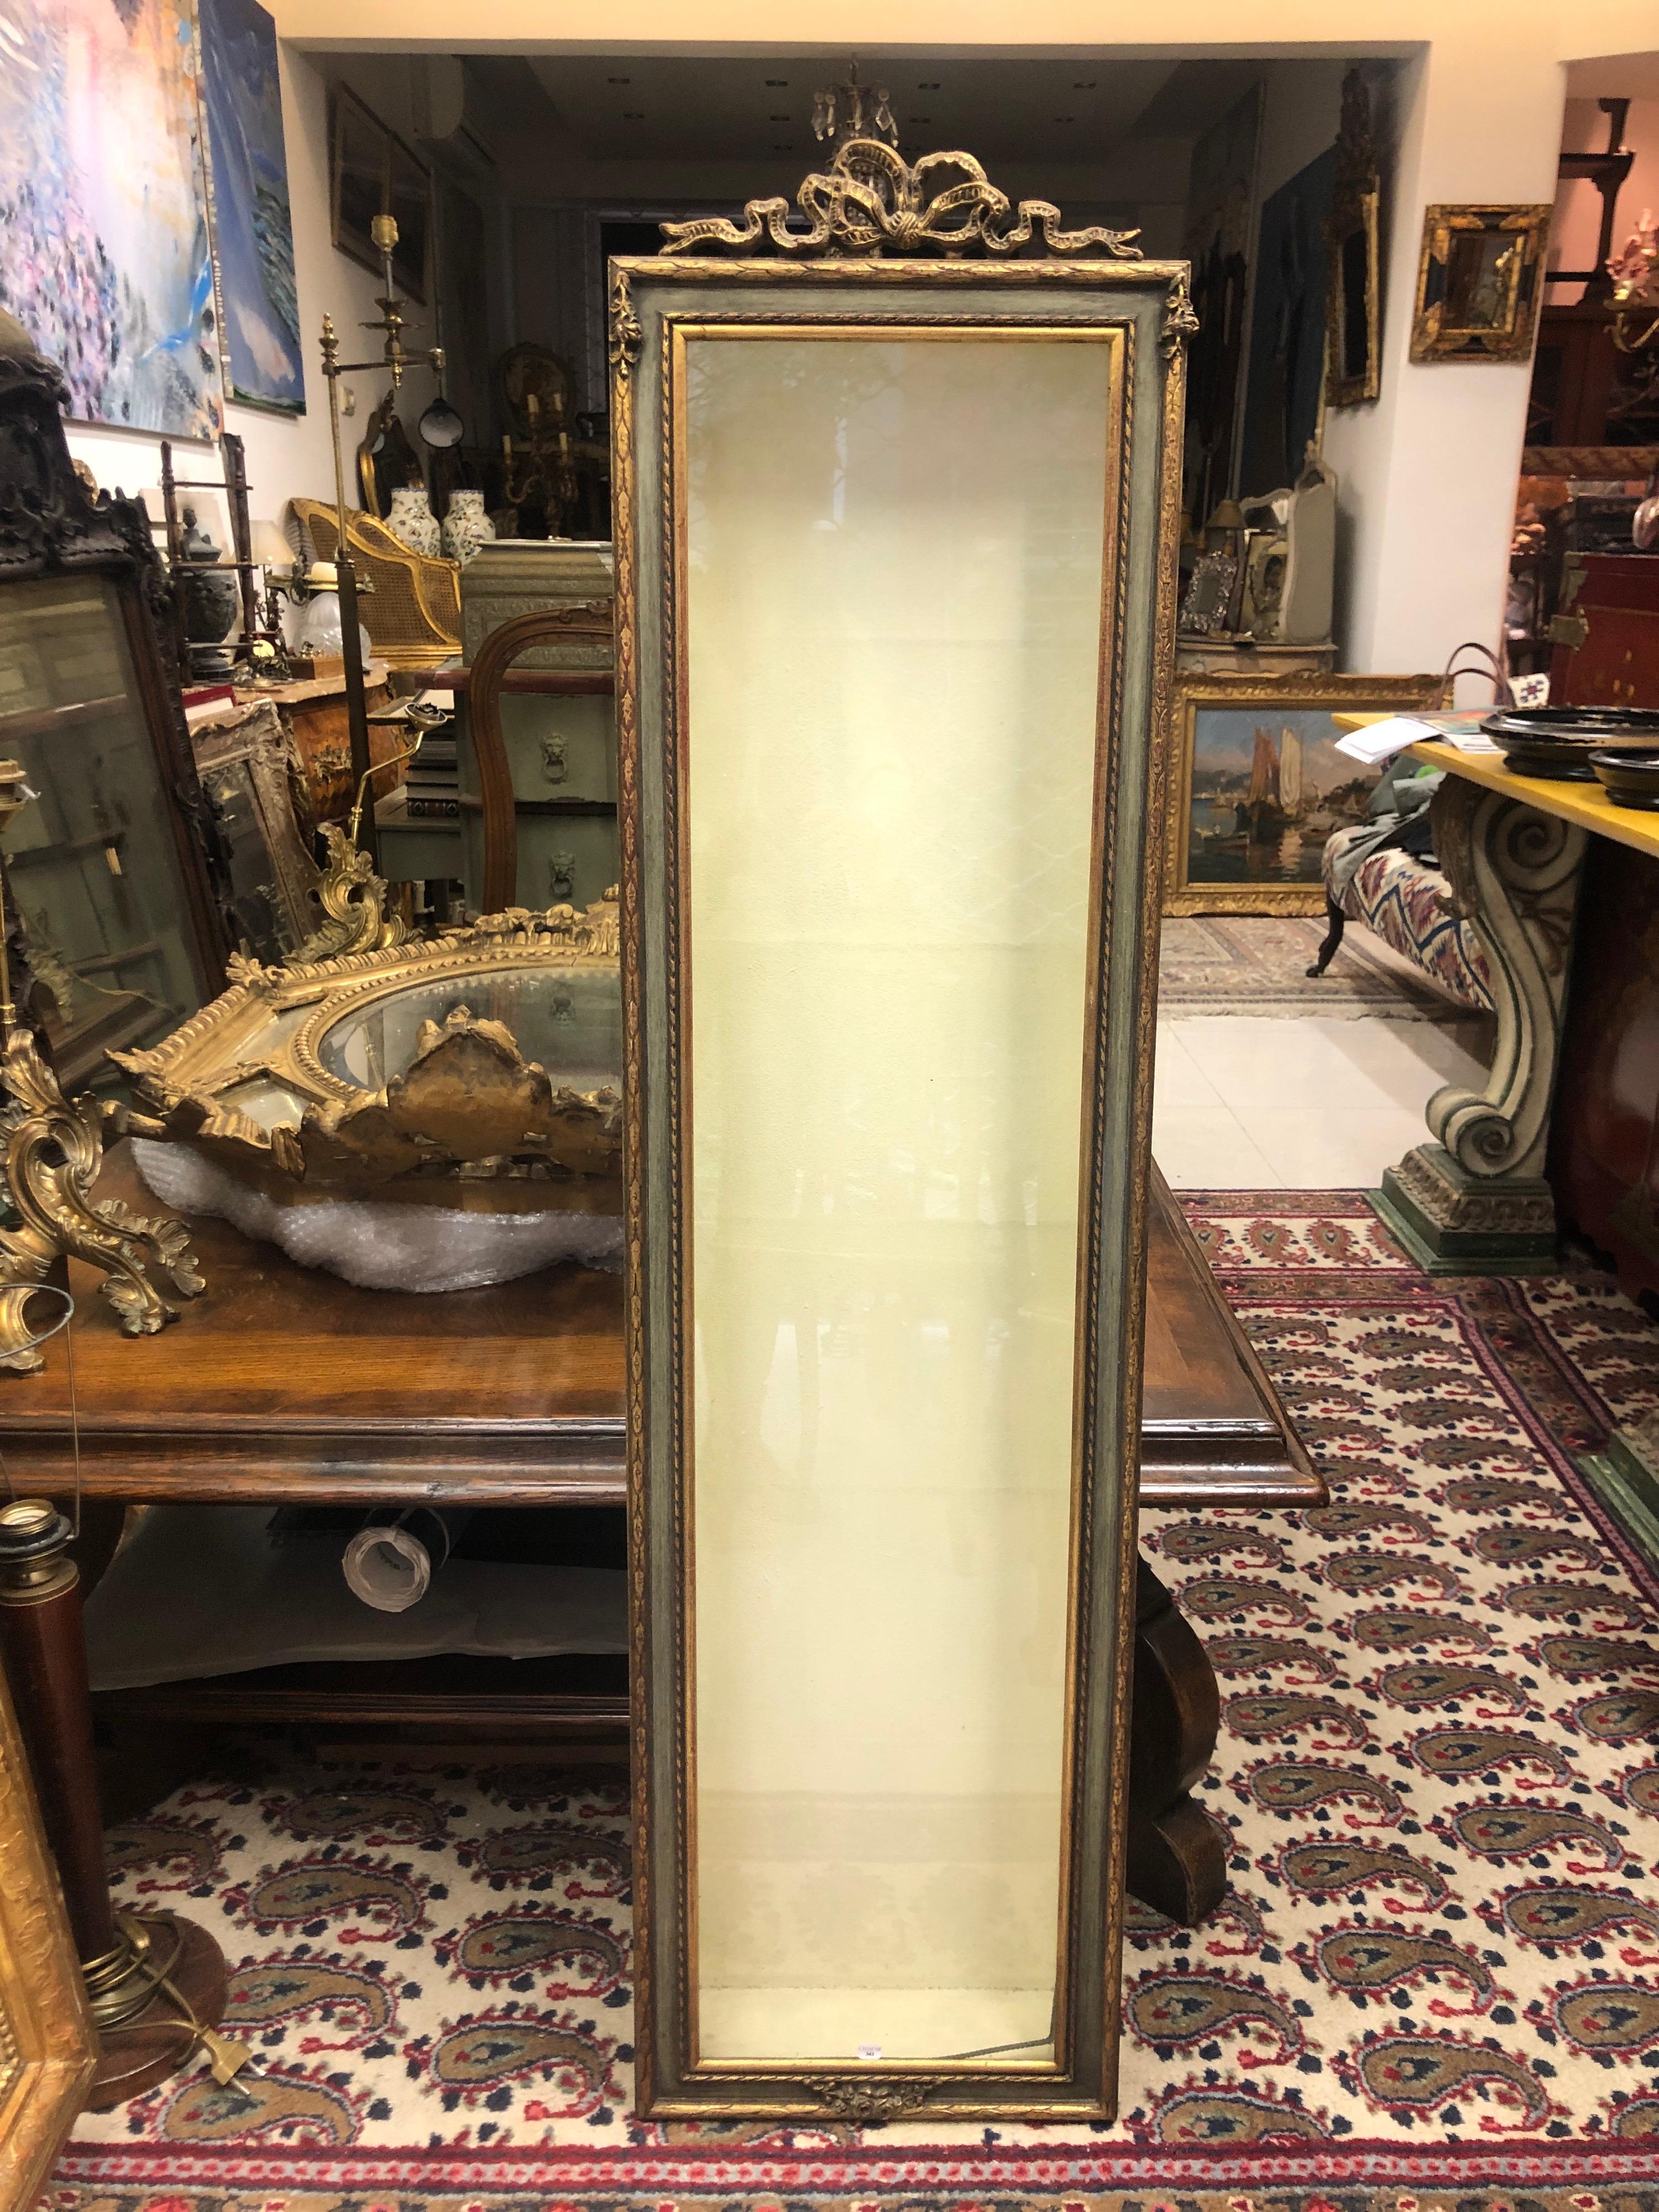 Vintage wooden hand painted wall mounted vitrine with typical Louis XVI decoration, that opens with glass door and contains four glass shelves.
France, circa 1950.